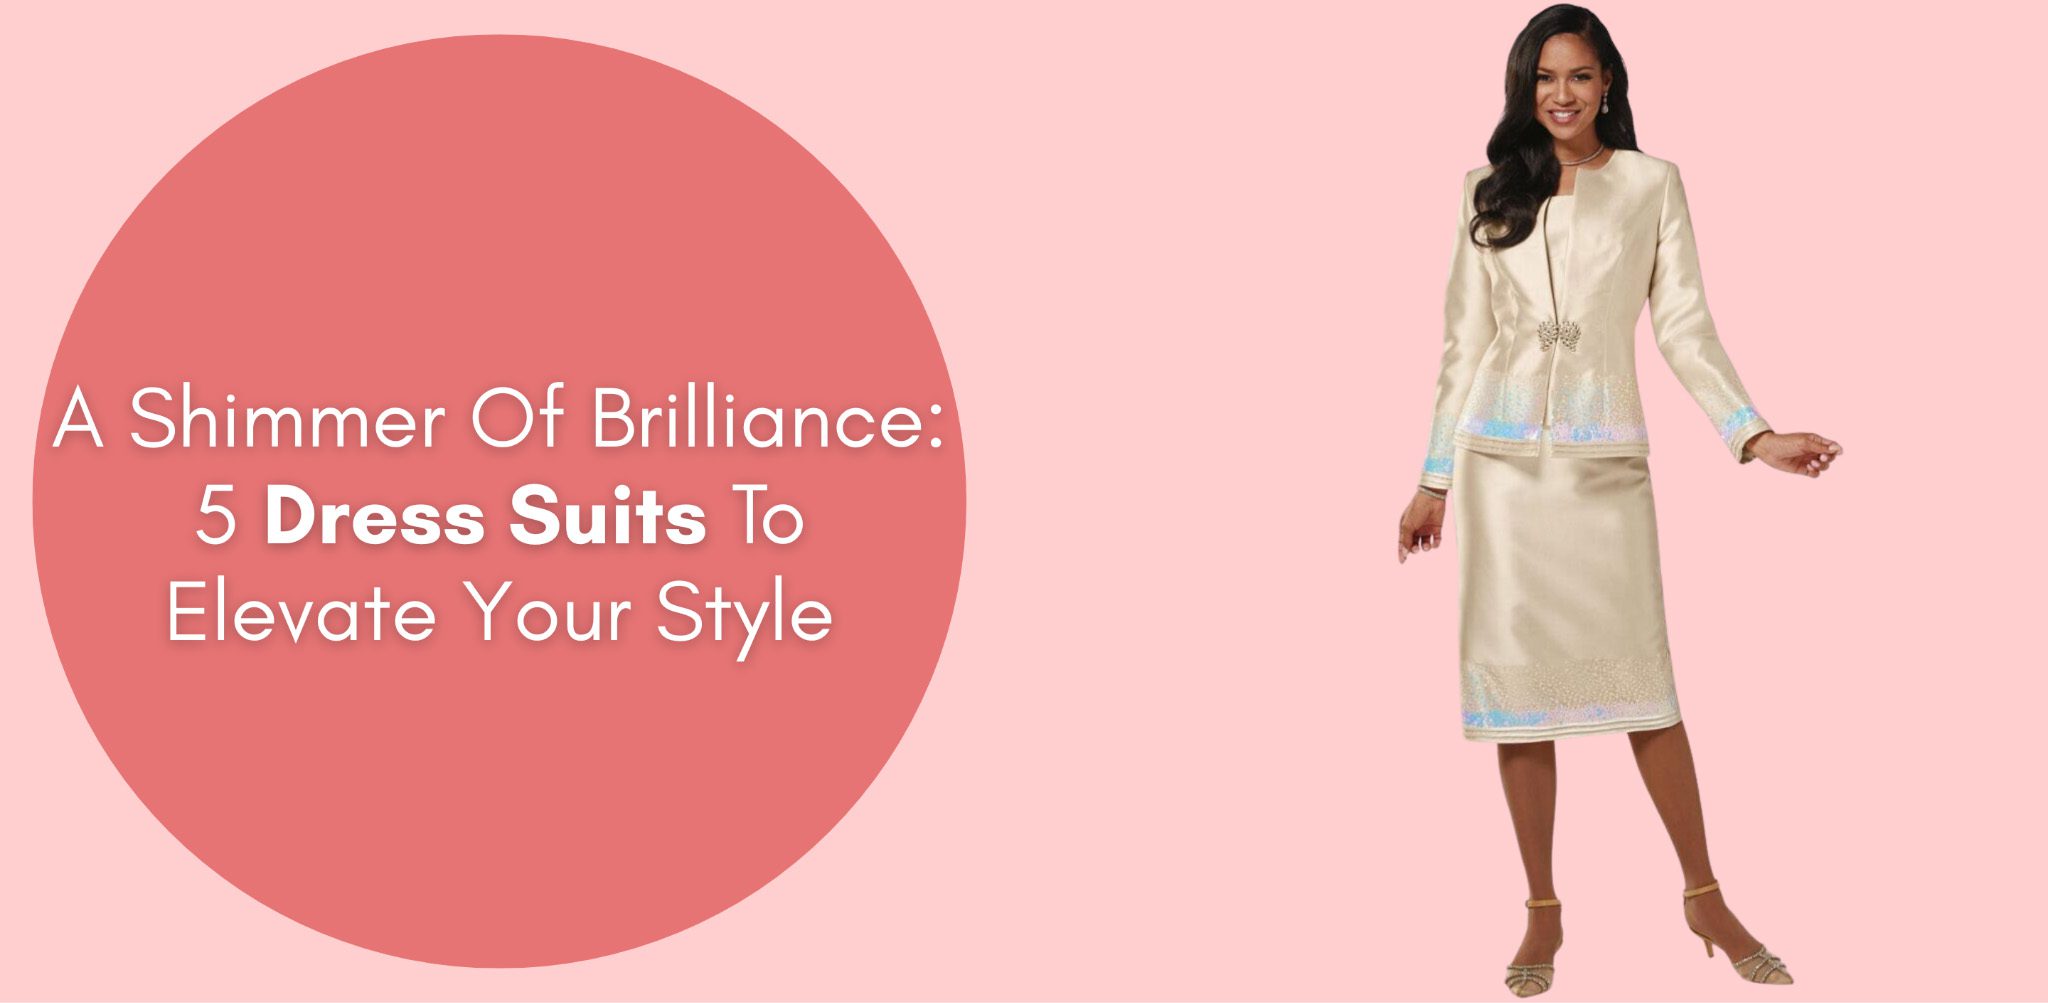 A Shimmer Of Brilliance: 5 Dress Suits To Elevate Your Style